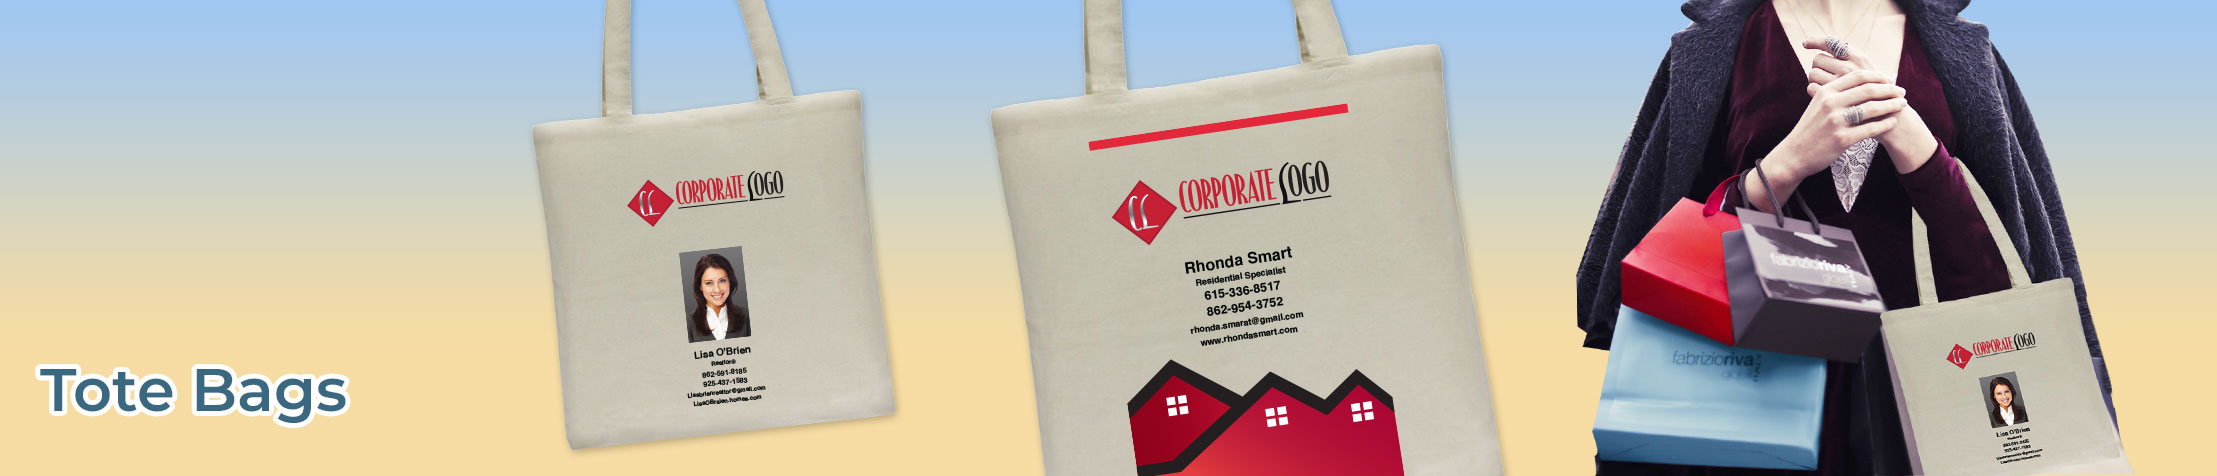 HomeSmart Real Estate Tote Bags - HomeSmart Real Estate  personalized realtor promotional products | BestPrintBuy.com